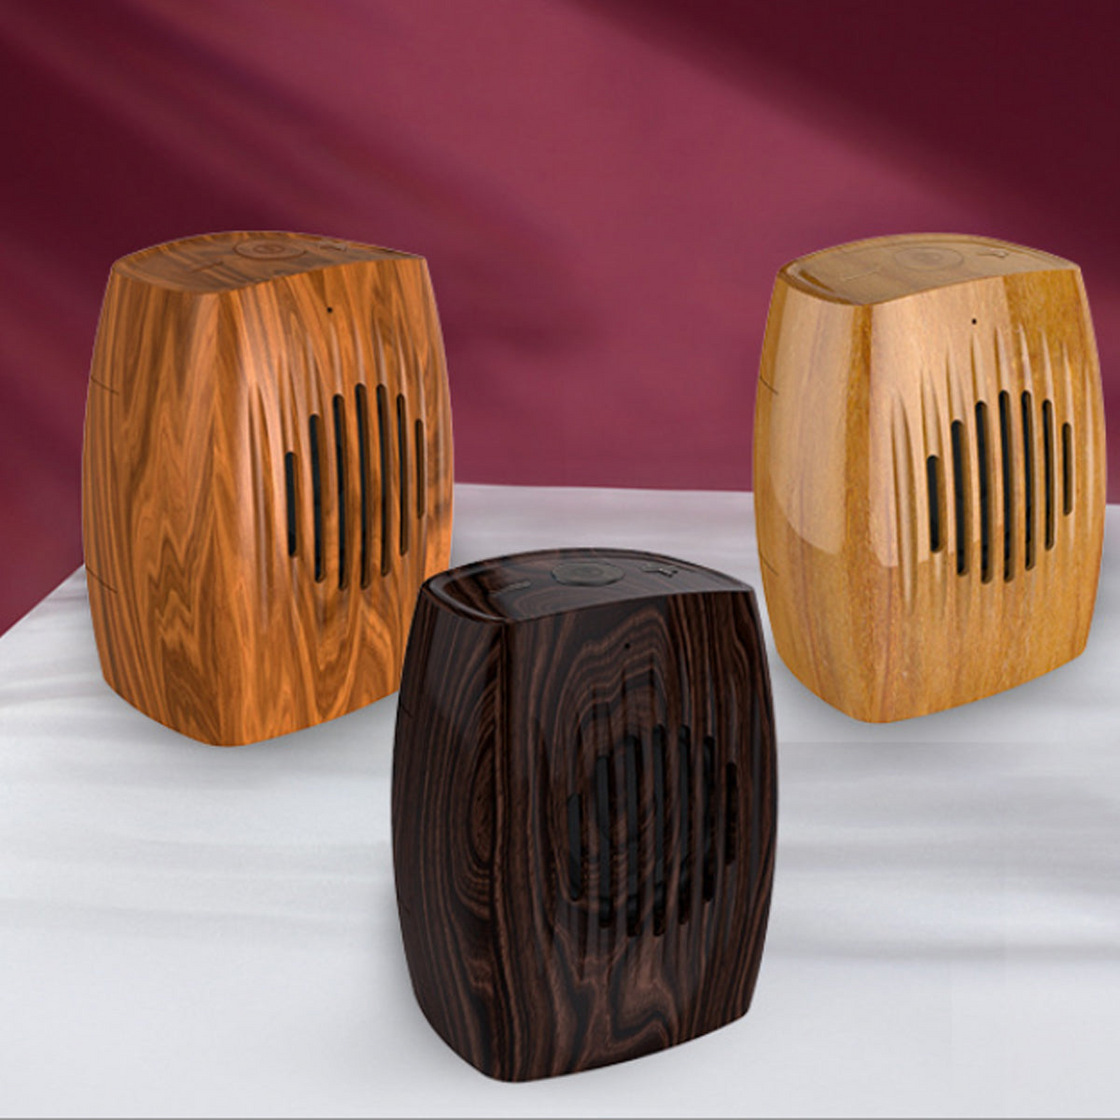 Wood Look Retro Bluetooth Speaker - Classic Home and Office Addition